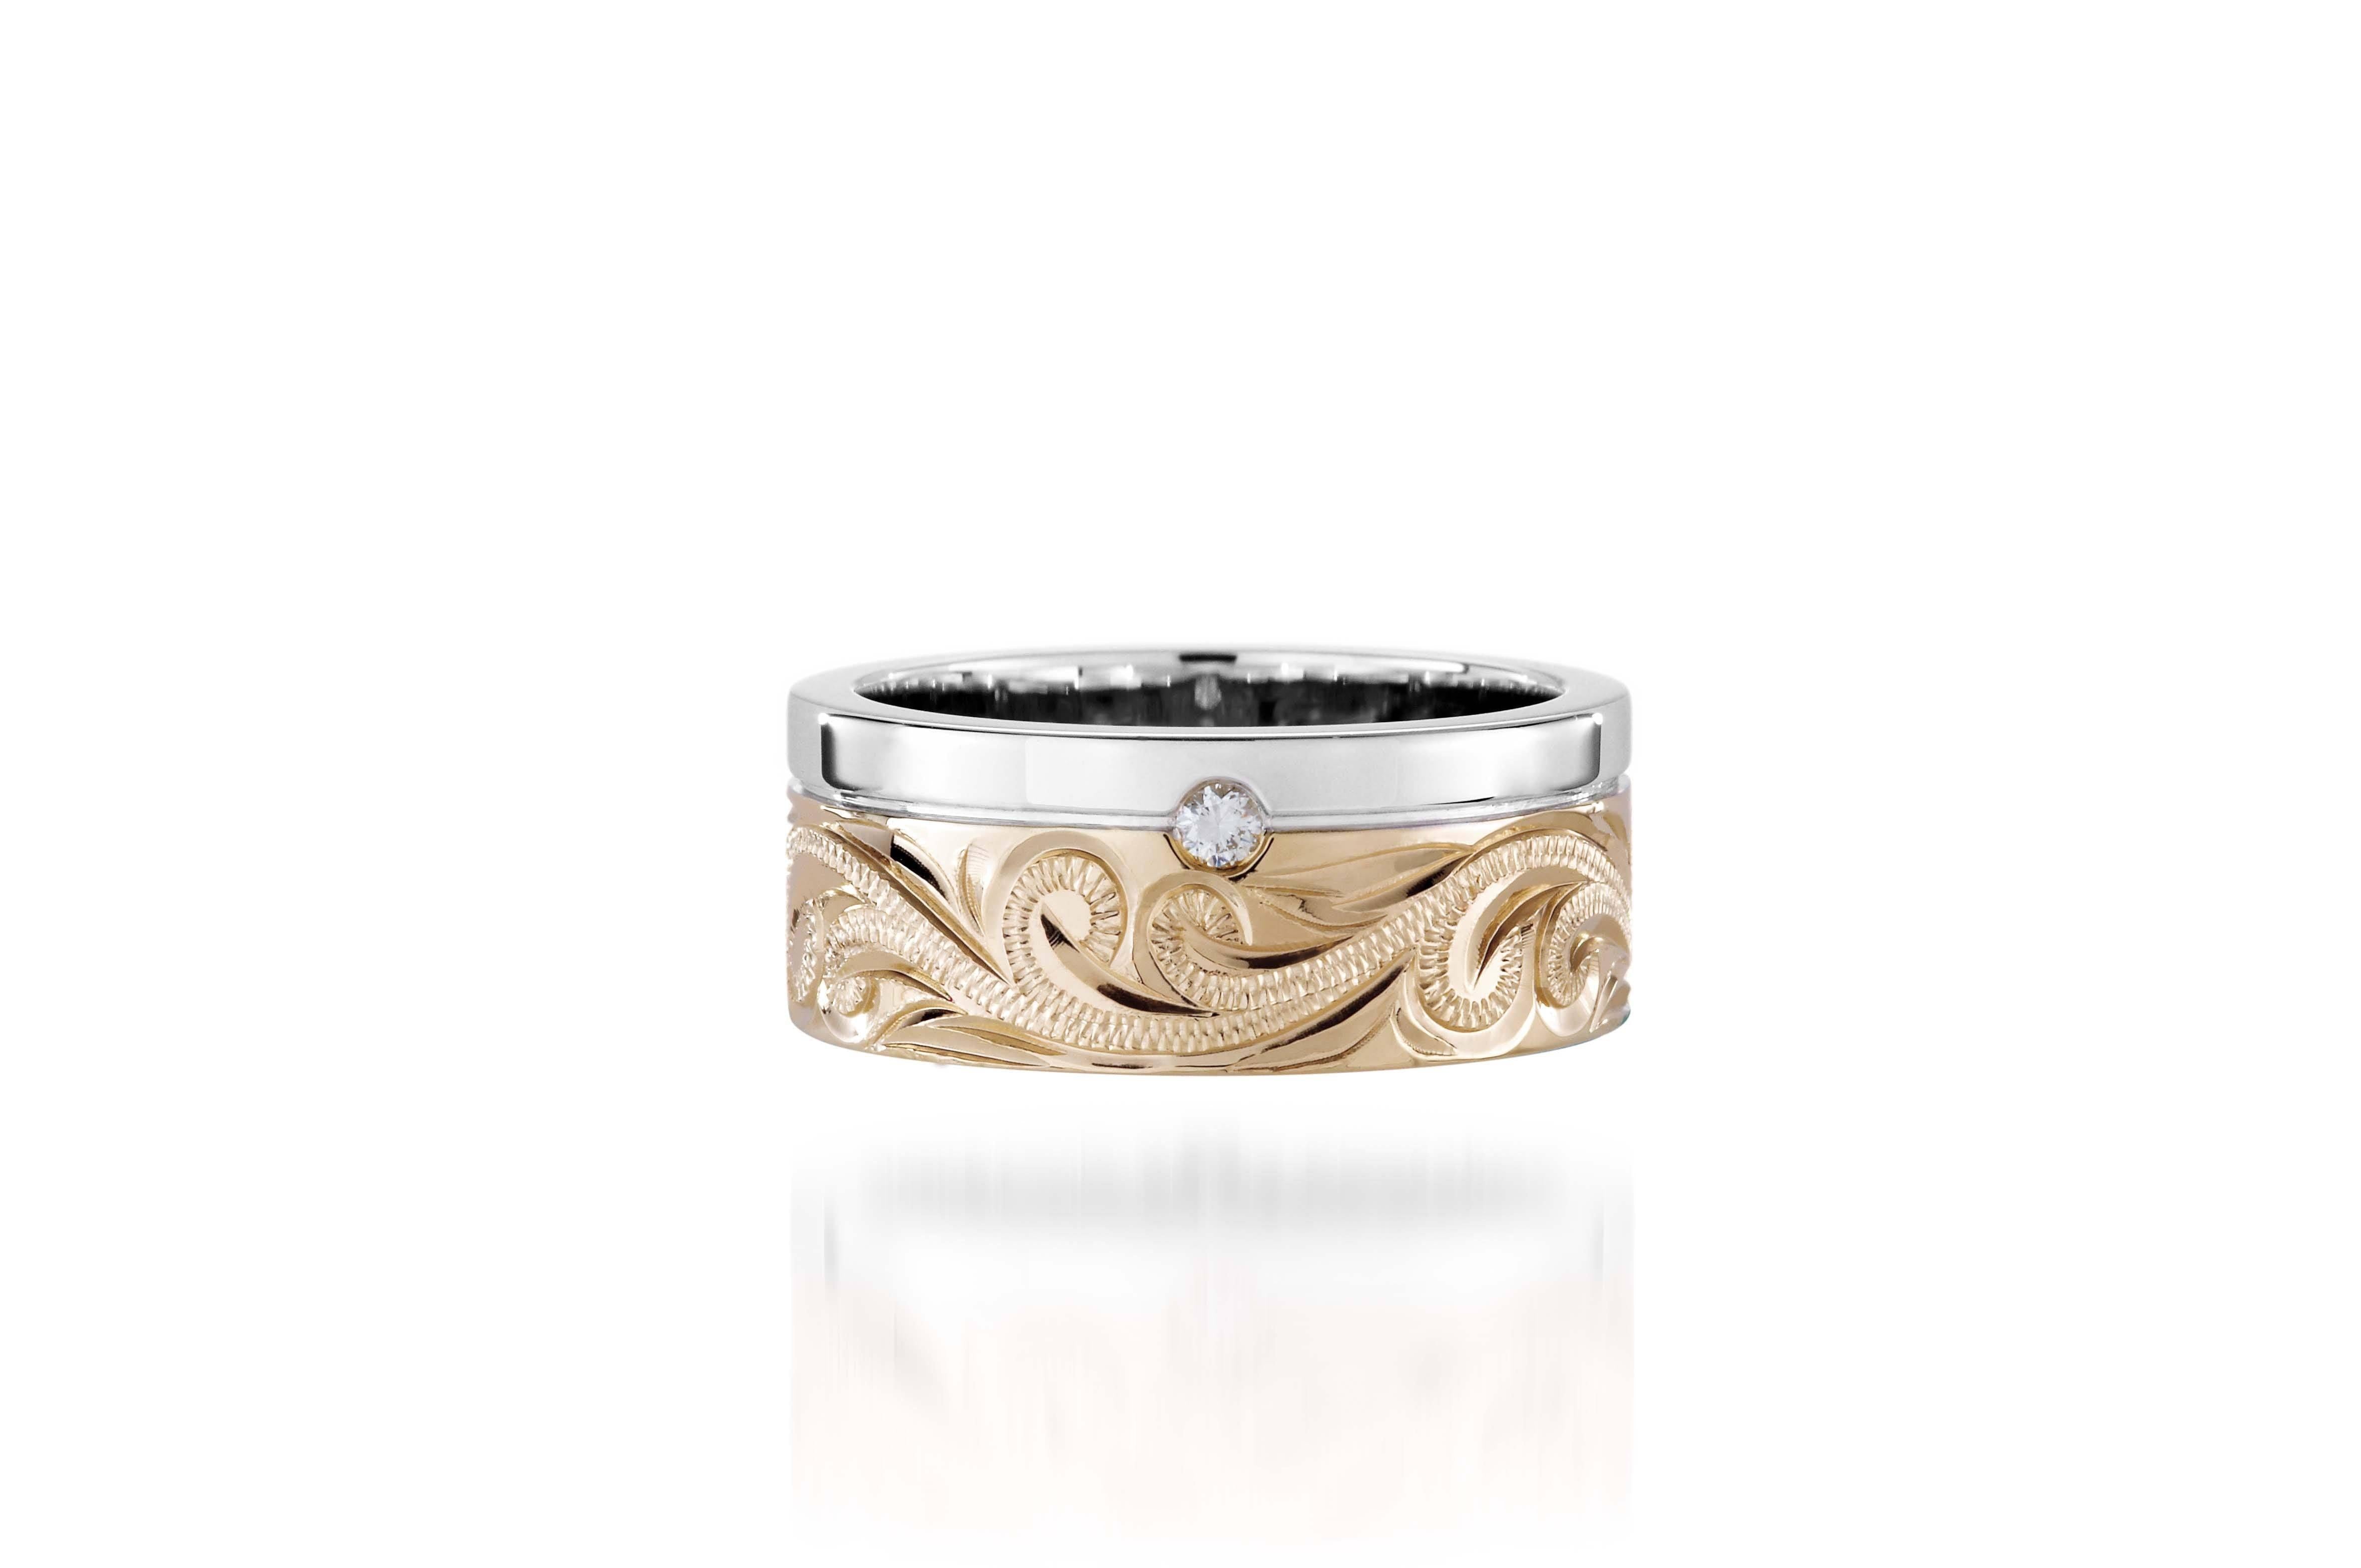 The picture shows a 14K white and yellow gold two-tone 8 mm channel ring with a diamond and hand-engravings.